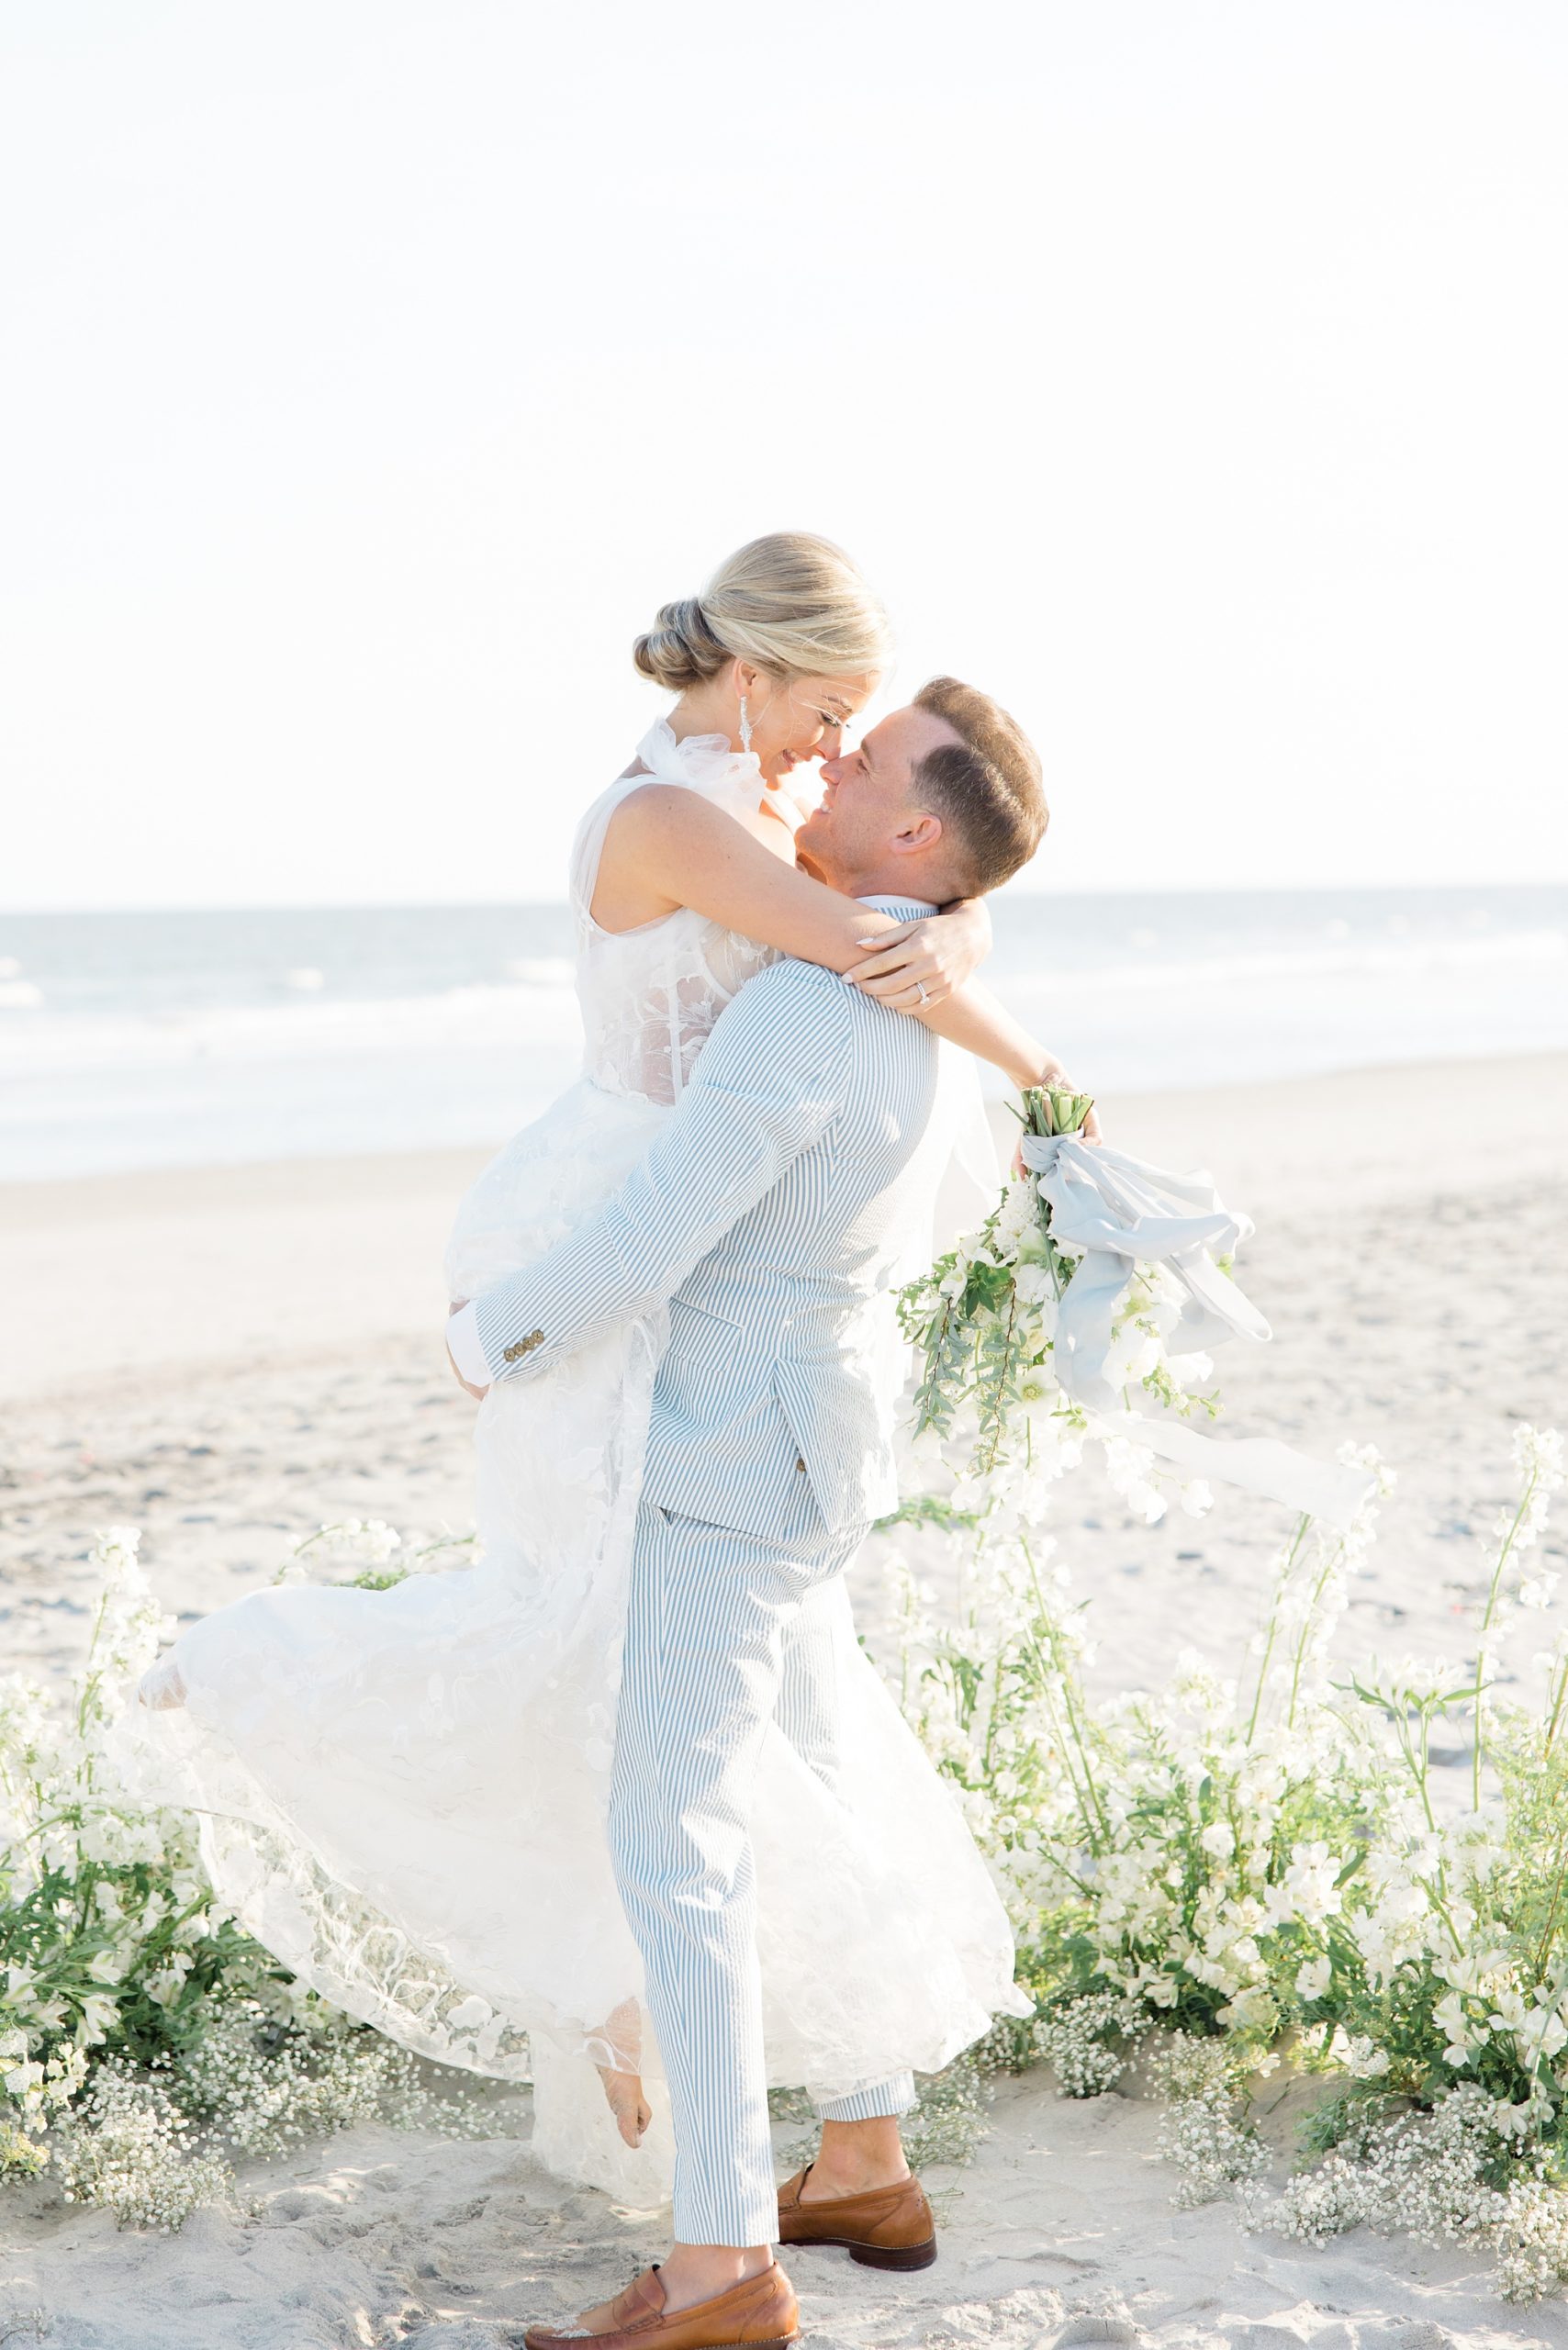 groom in light blue jacket lifts bride up standing on beach